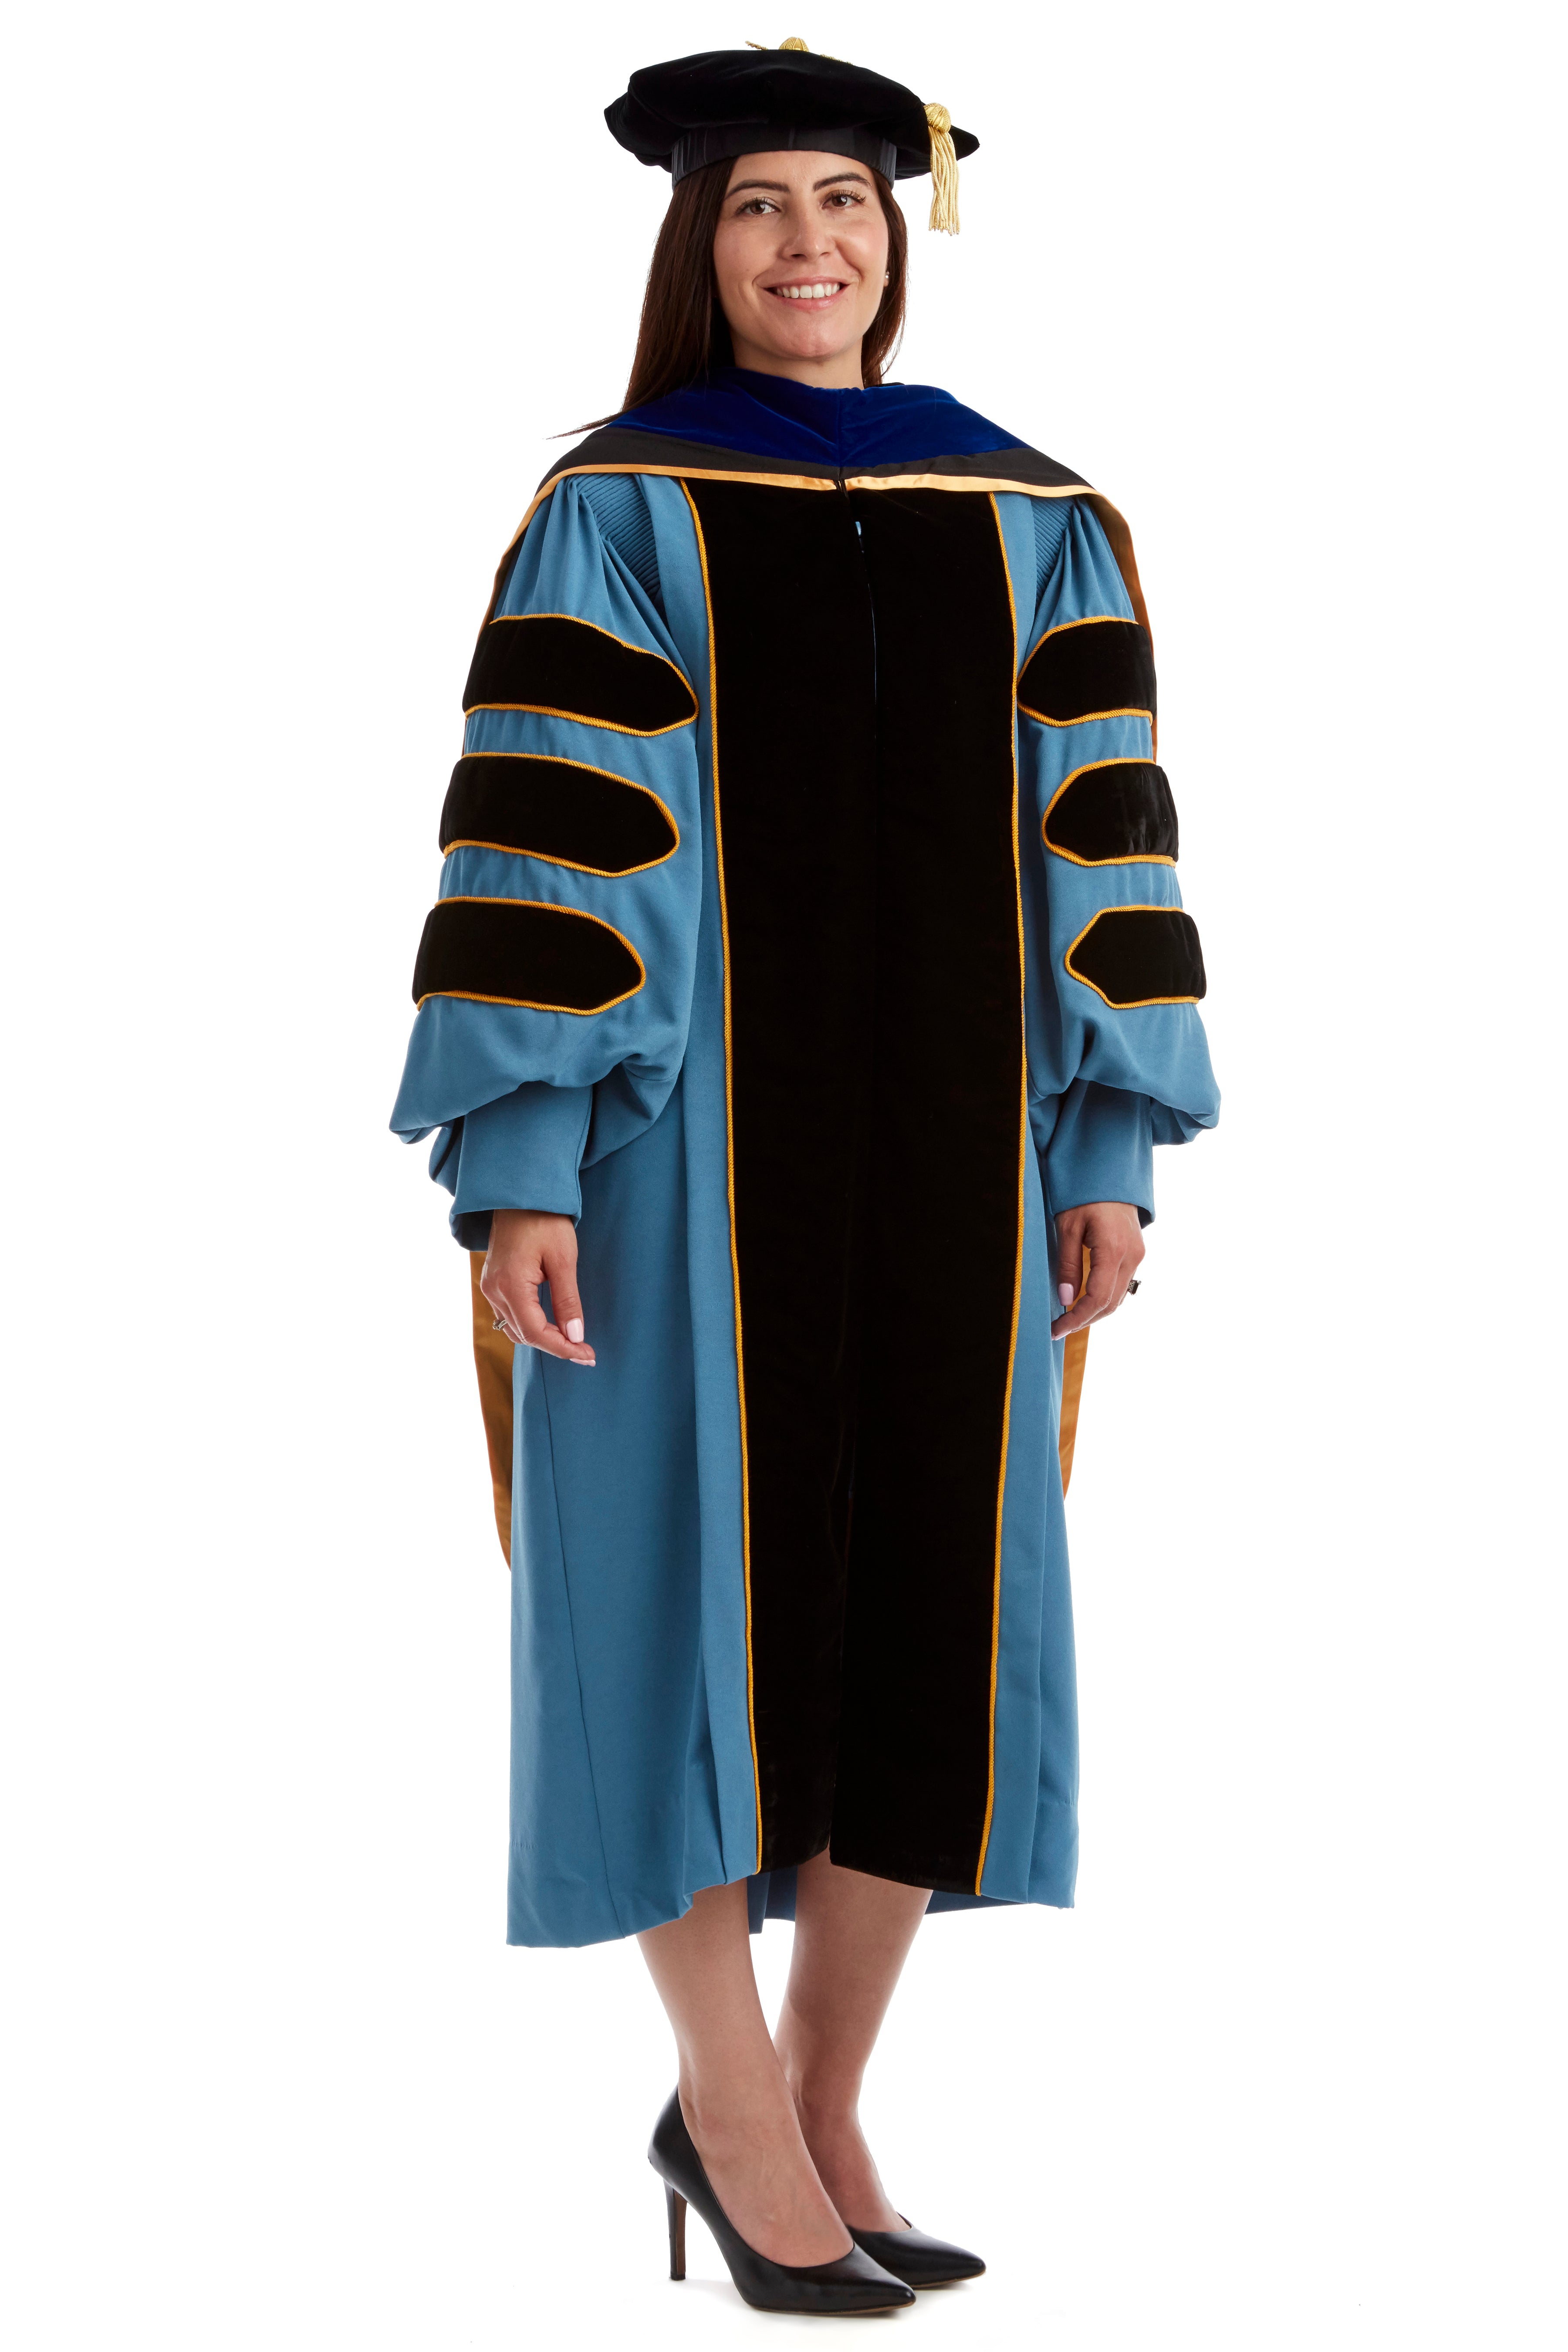 University of Michigan PhD Regalia Rental Set. Doctoral Gown, PhD Hood, and eight sided doctoral Tam with silk or gold bullion tassel